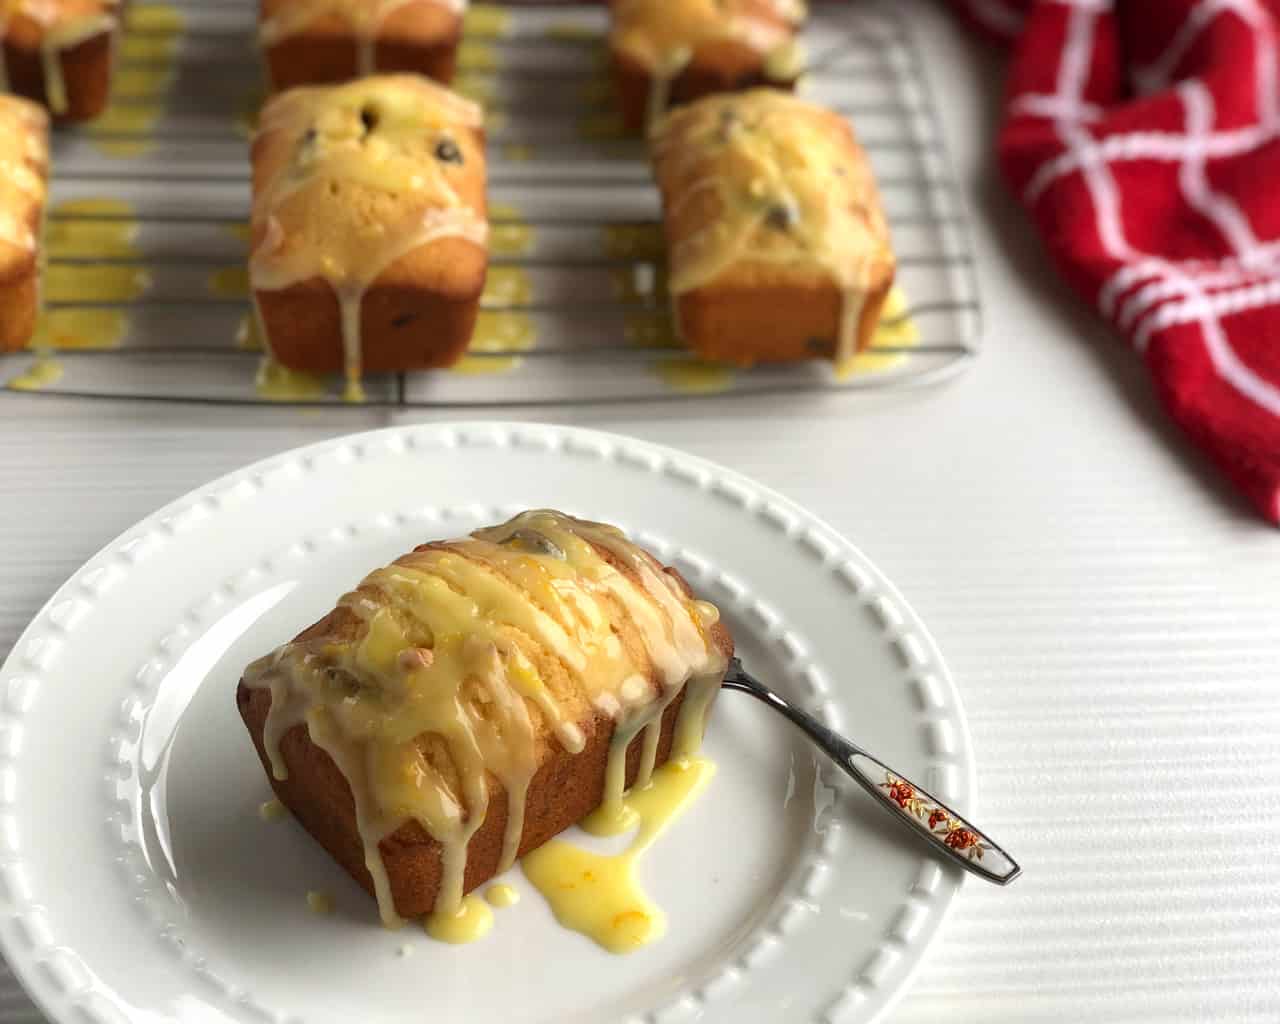 Sliced White Chocolate & Cranberry Loaf with Orange Icing Glaze Ready to Serve